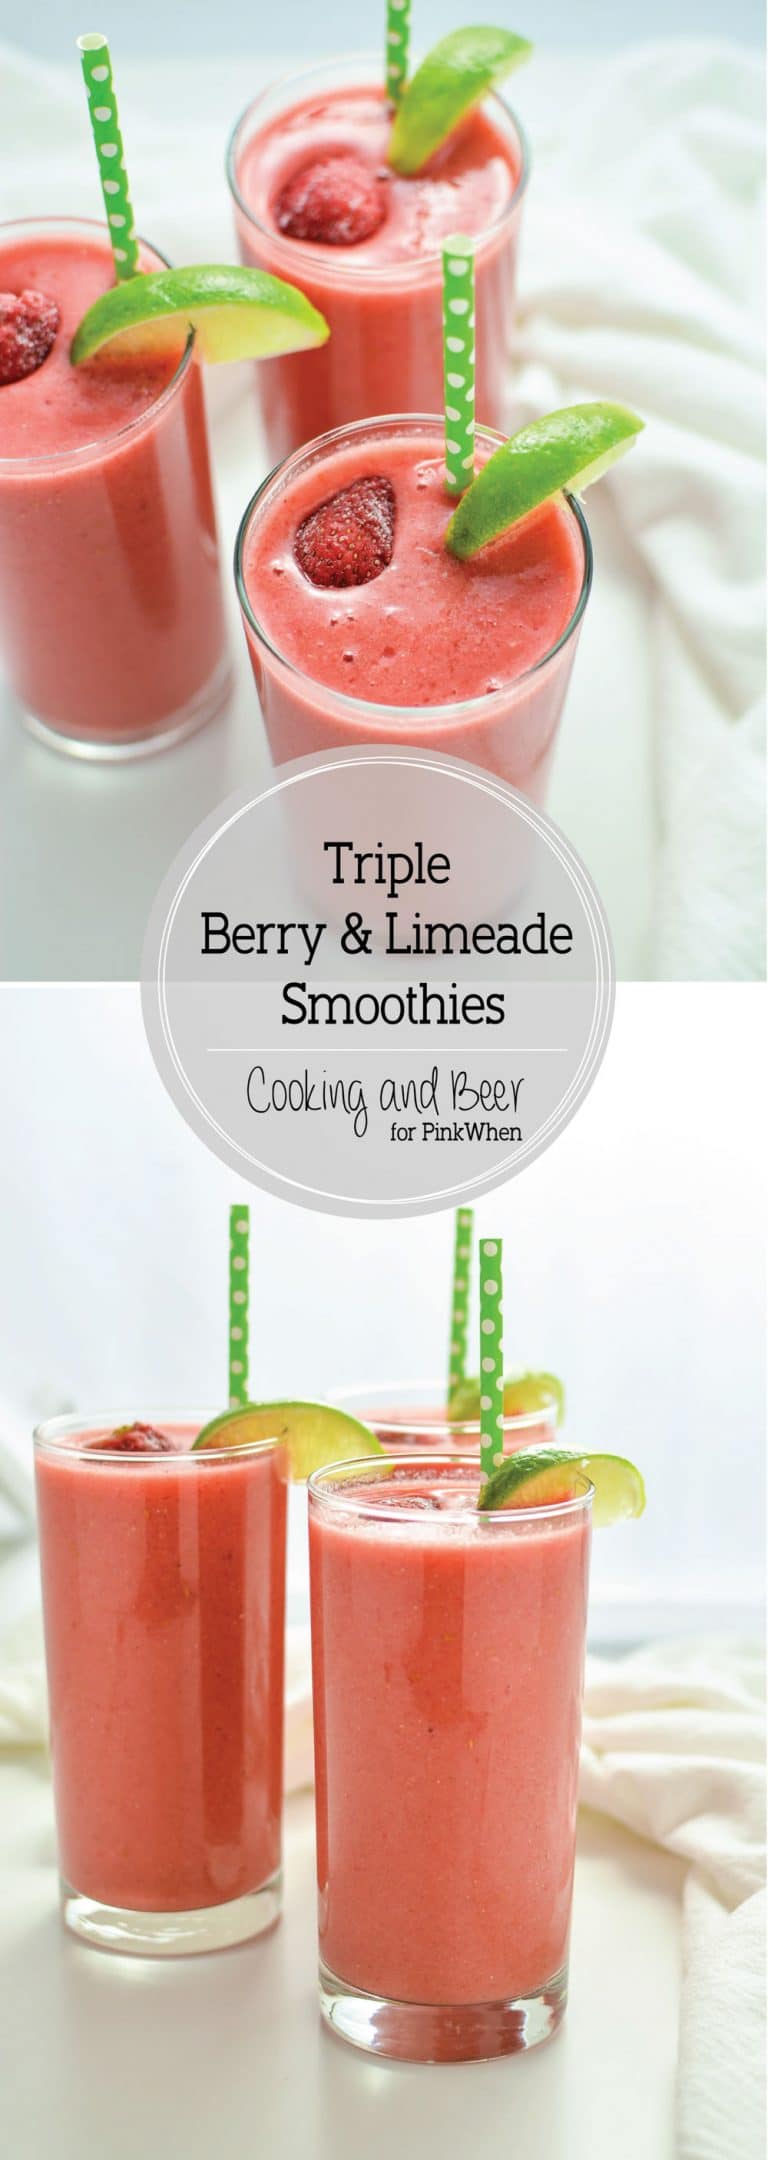 Triple Berry Limeade Smoothies made with almond milk, mixed berries, banana, and flax seed. A perfect breakfast smoothie! 